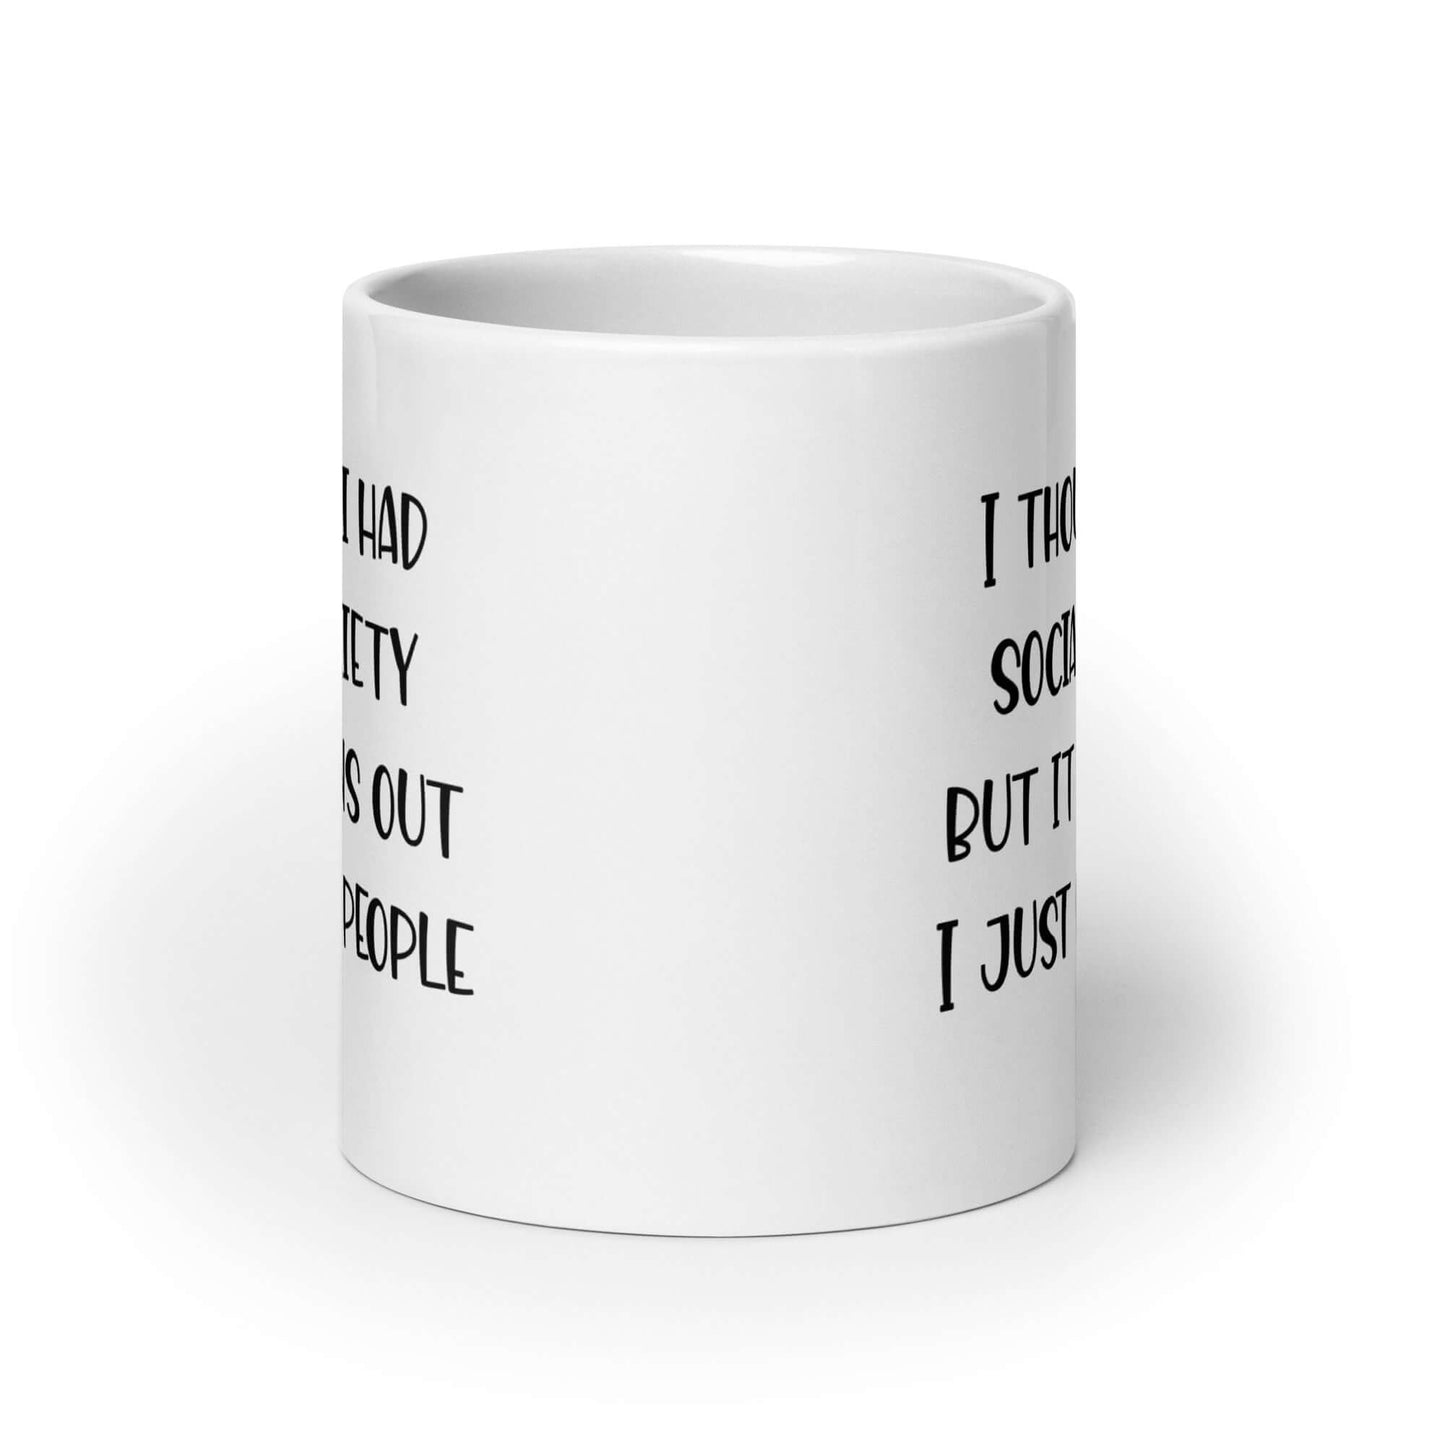 I thought I had social anxiety but it turns out I just hate people funny mug